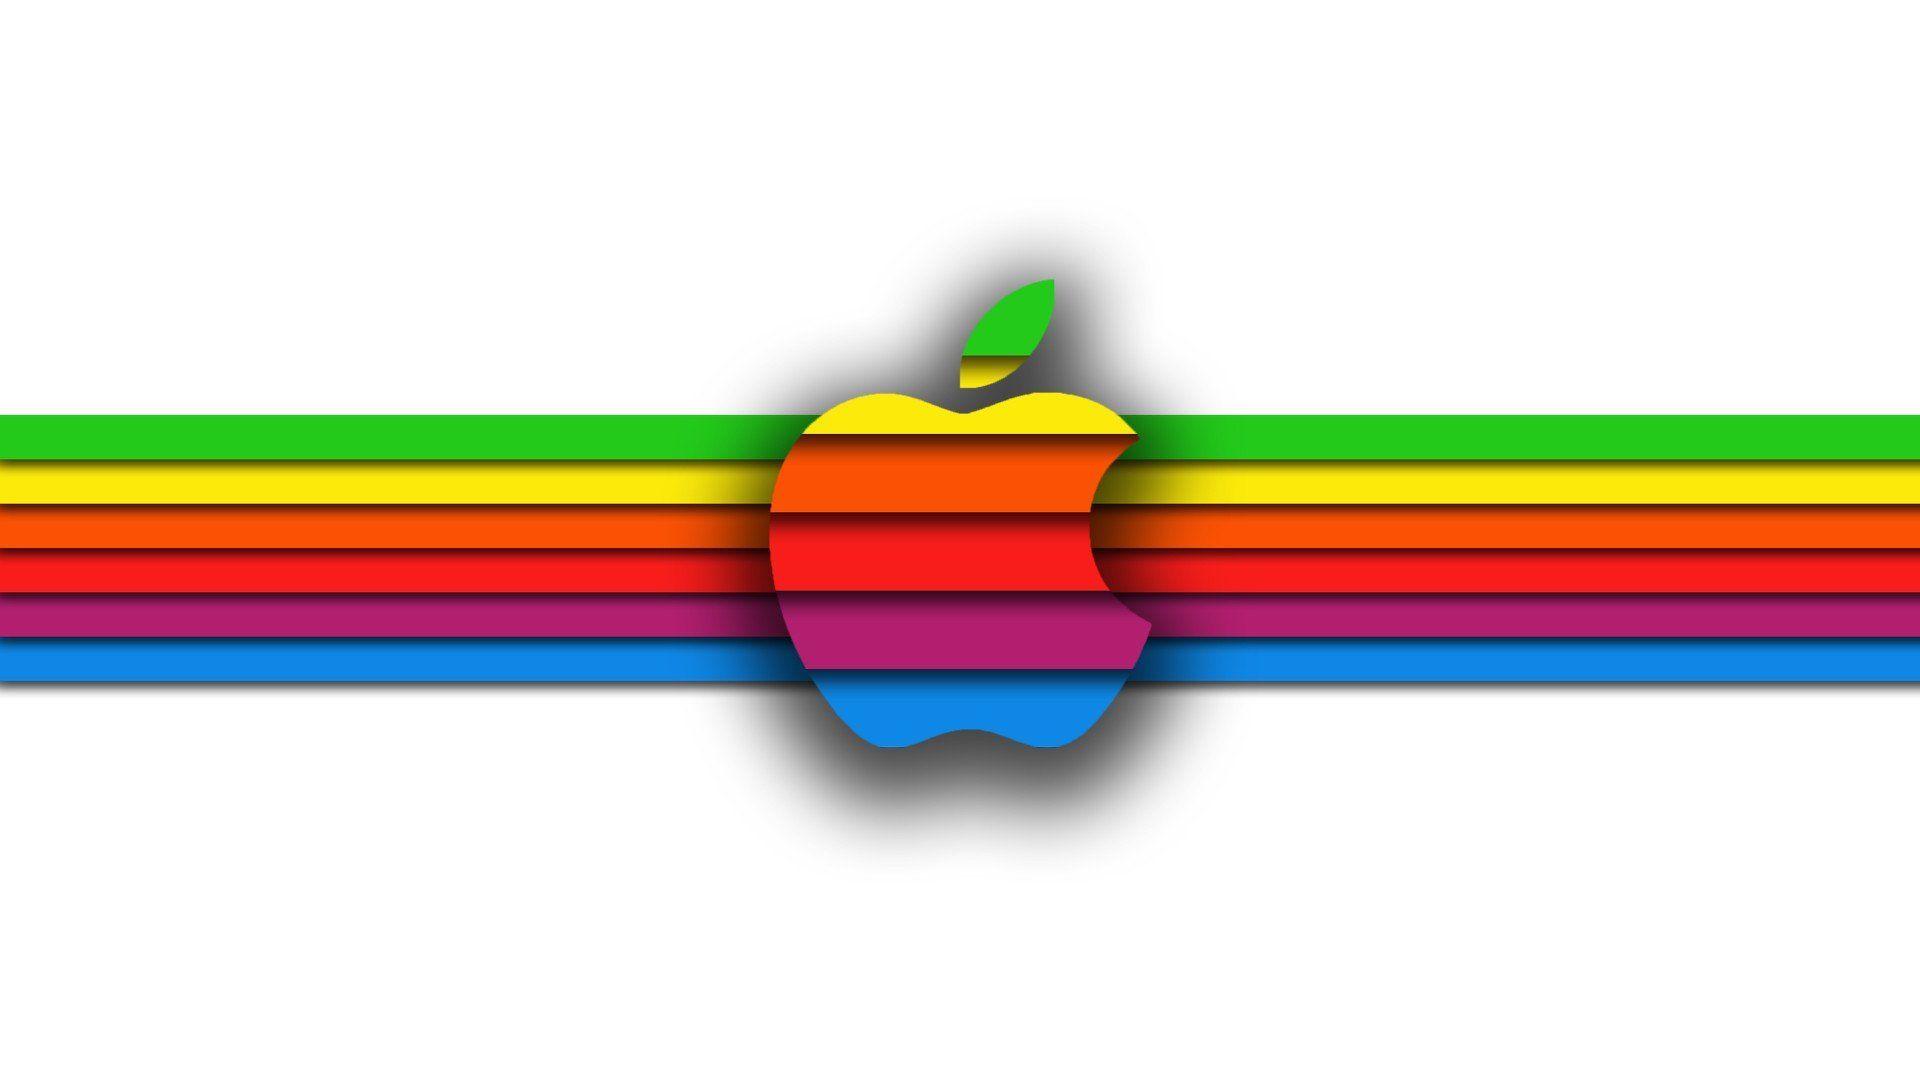 Multi Color World Logo - Wallpaper : 1920x1080 px, abstract, apple, colors, logos